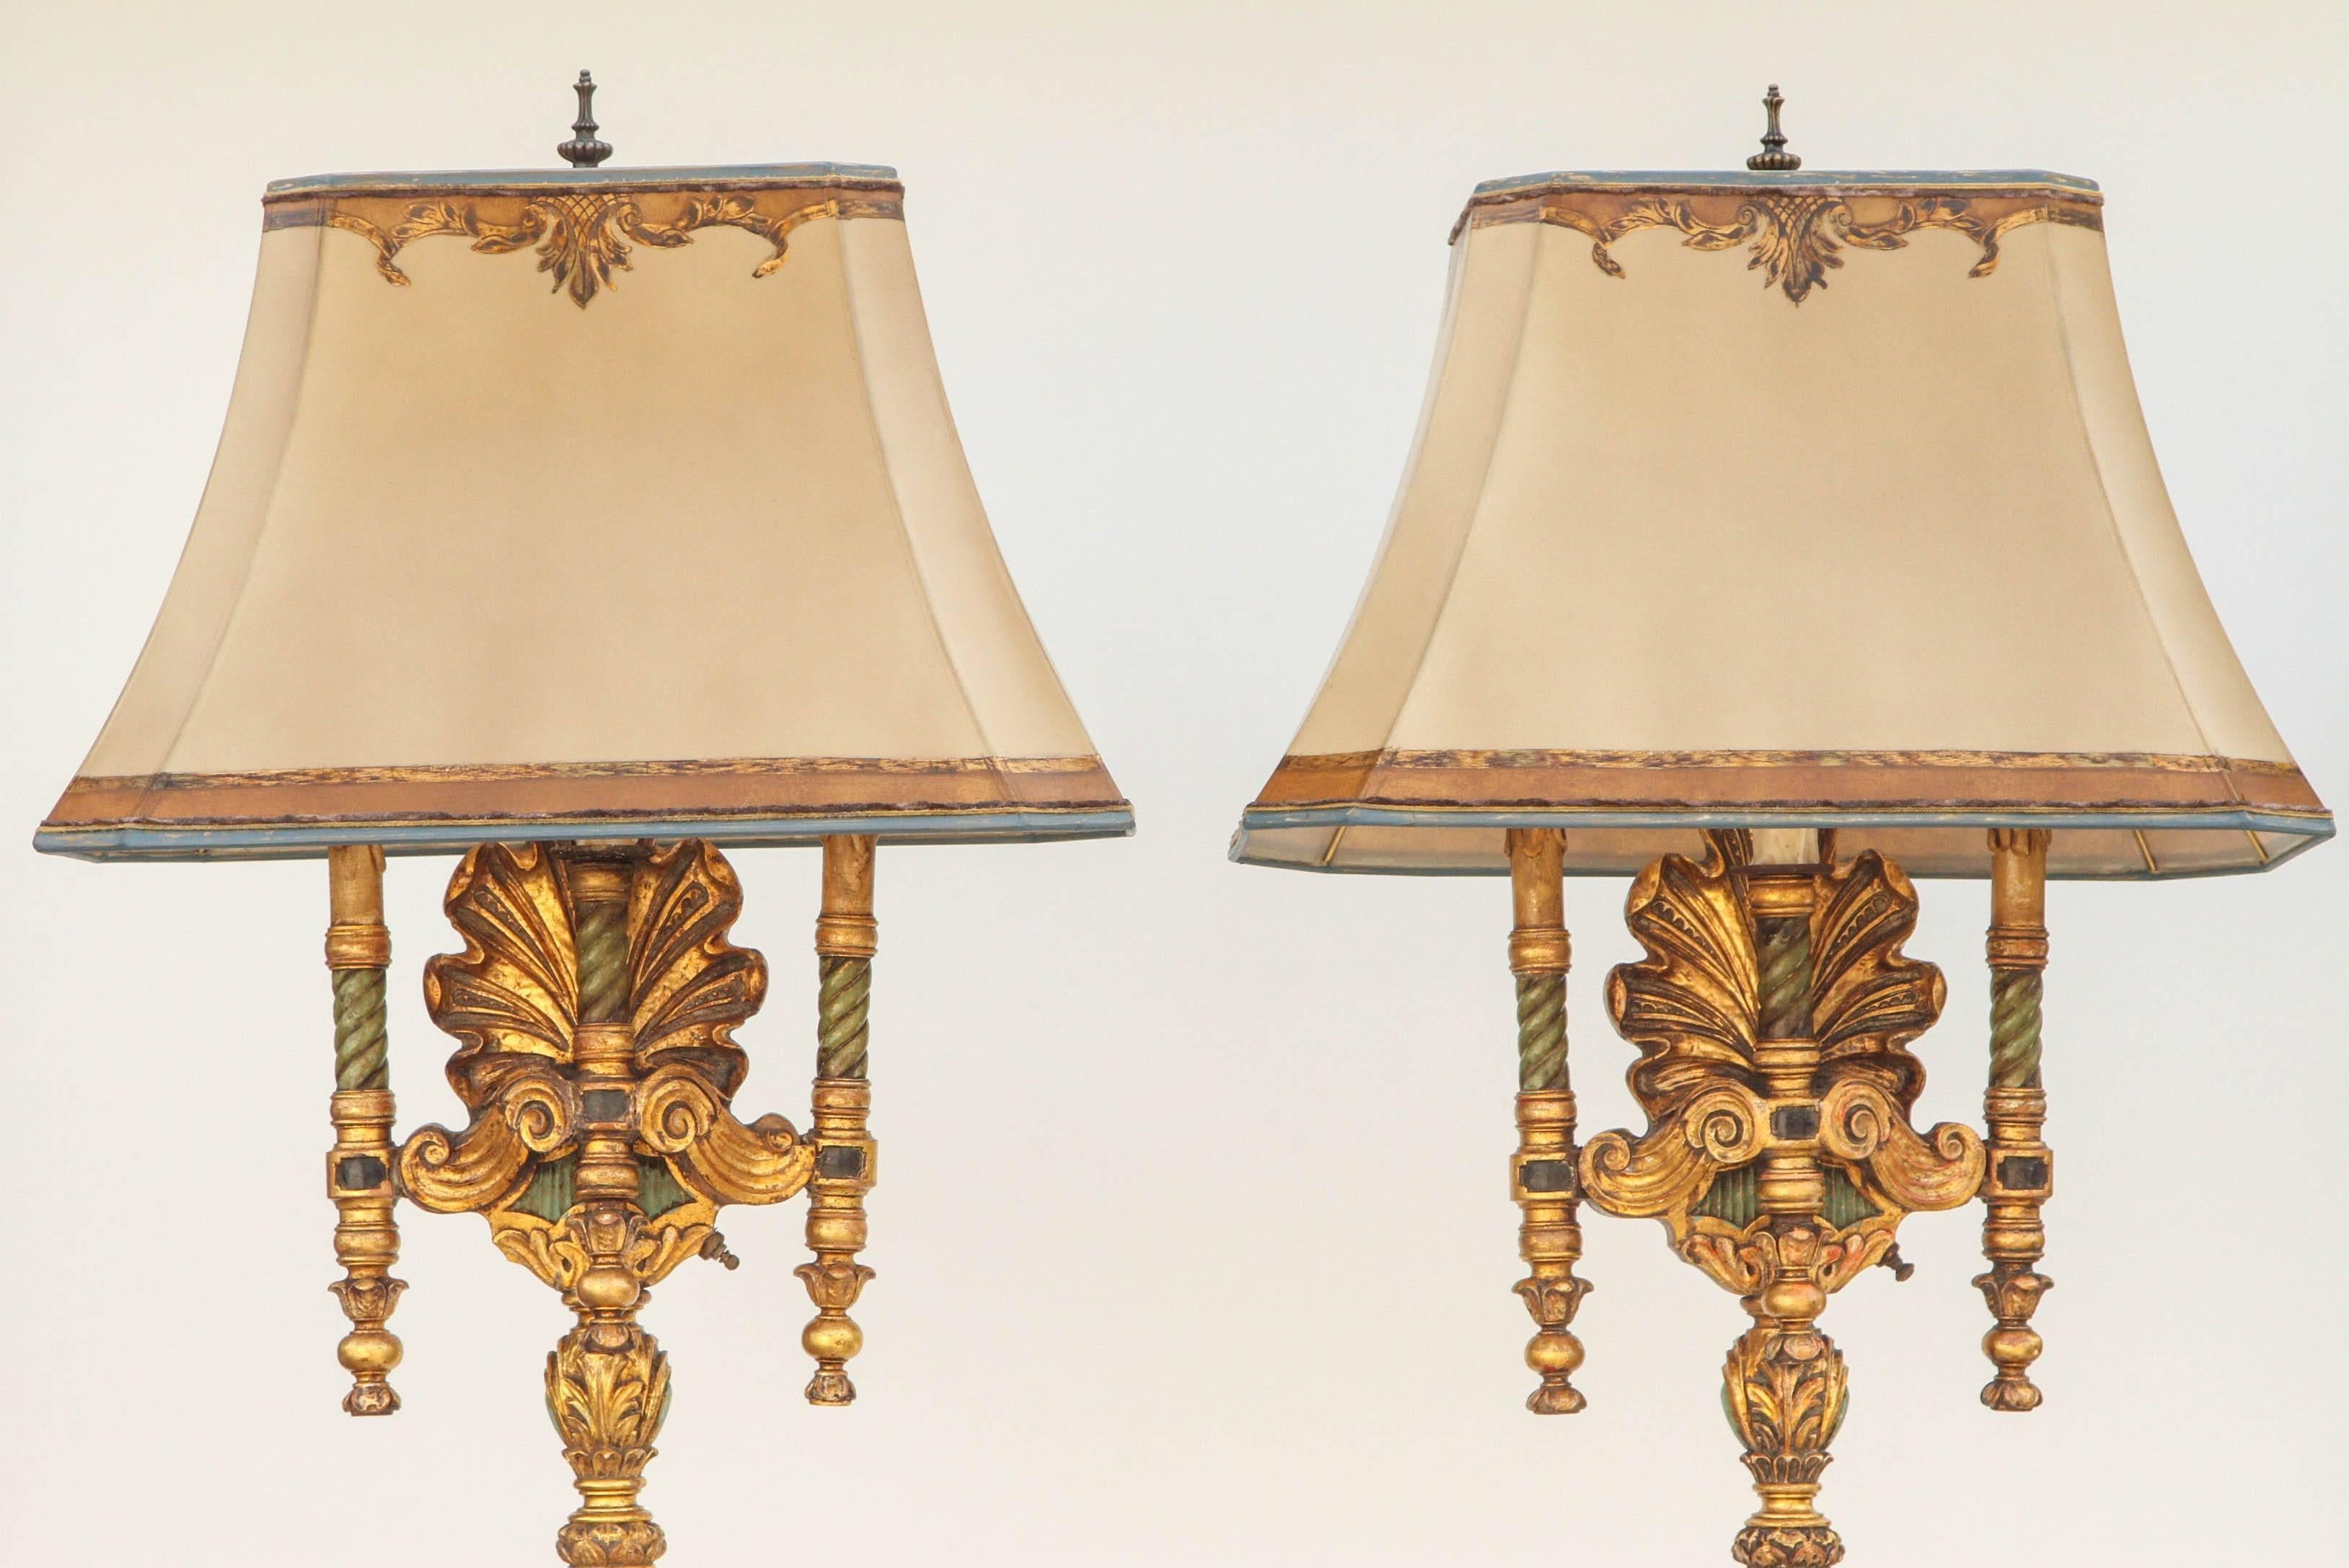 Pair of 1930s Italian carved polychrome floor lamps with a shell motif. They were originally torchieres and have been converted to floor lamps. The shades are included and are handmade of parchment paper. They are hand gilded and decorated. The